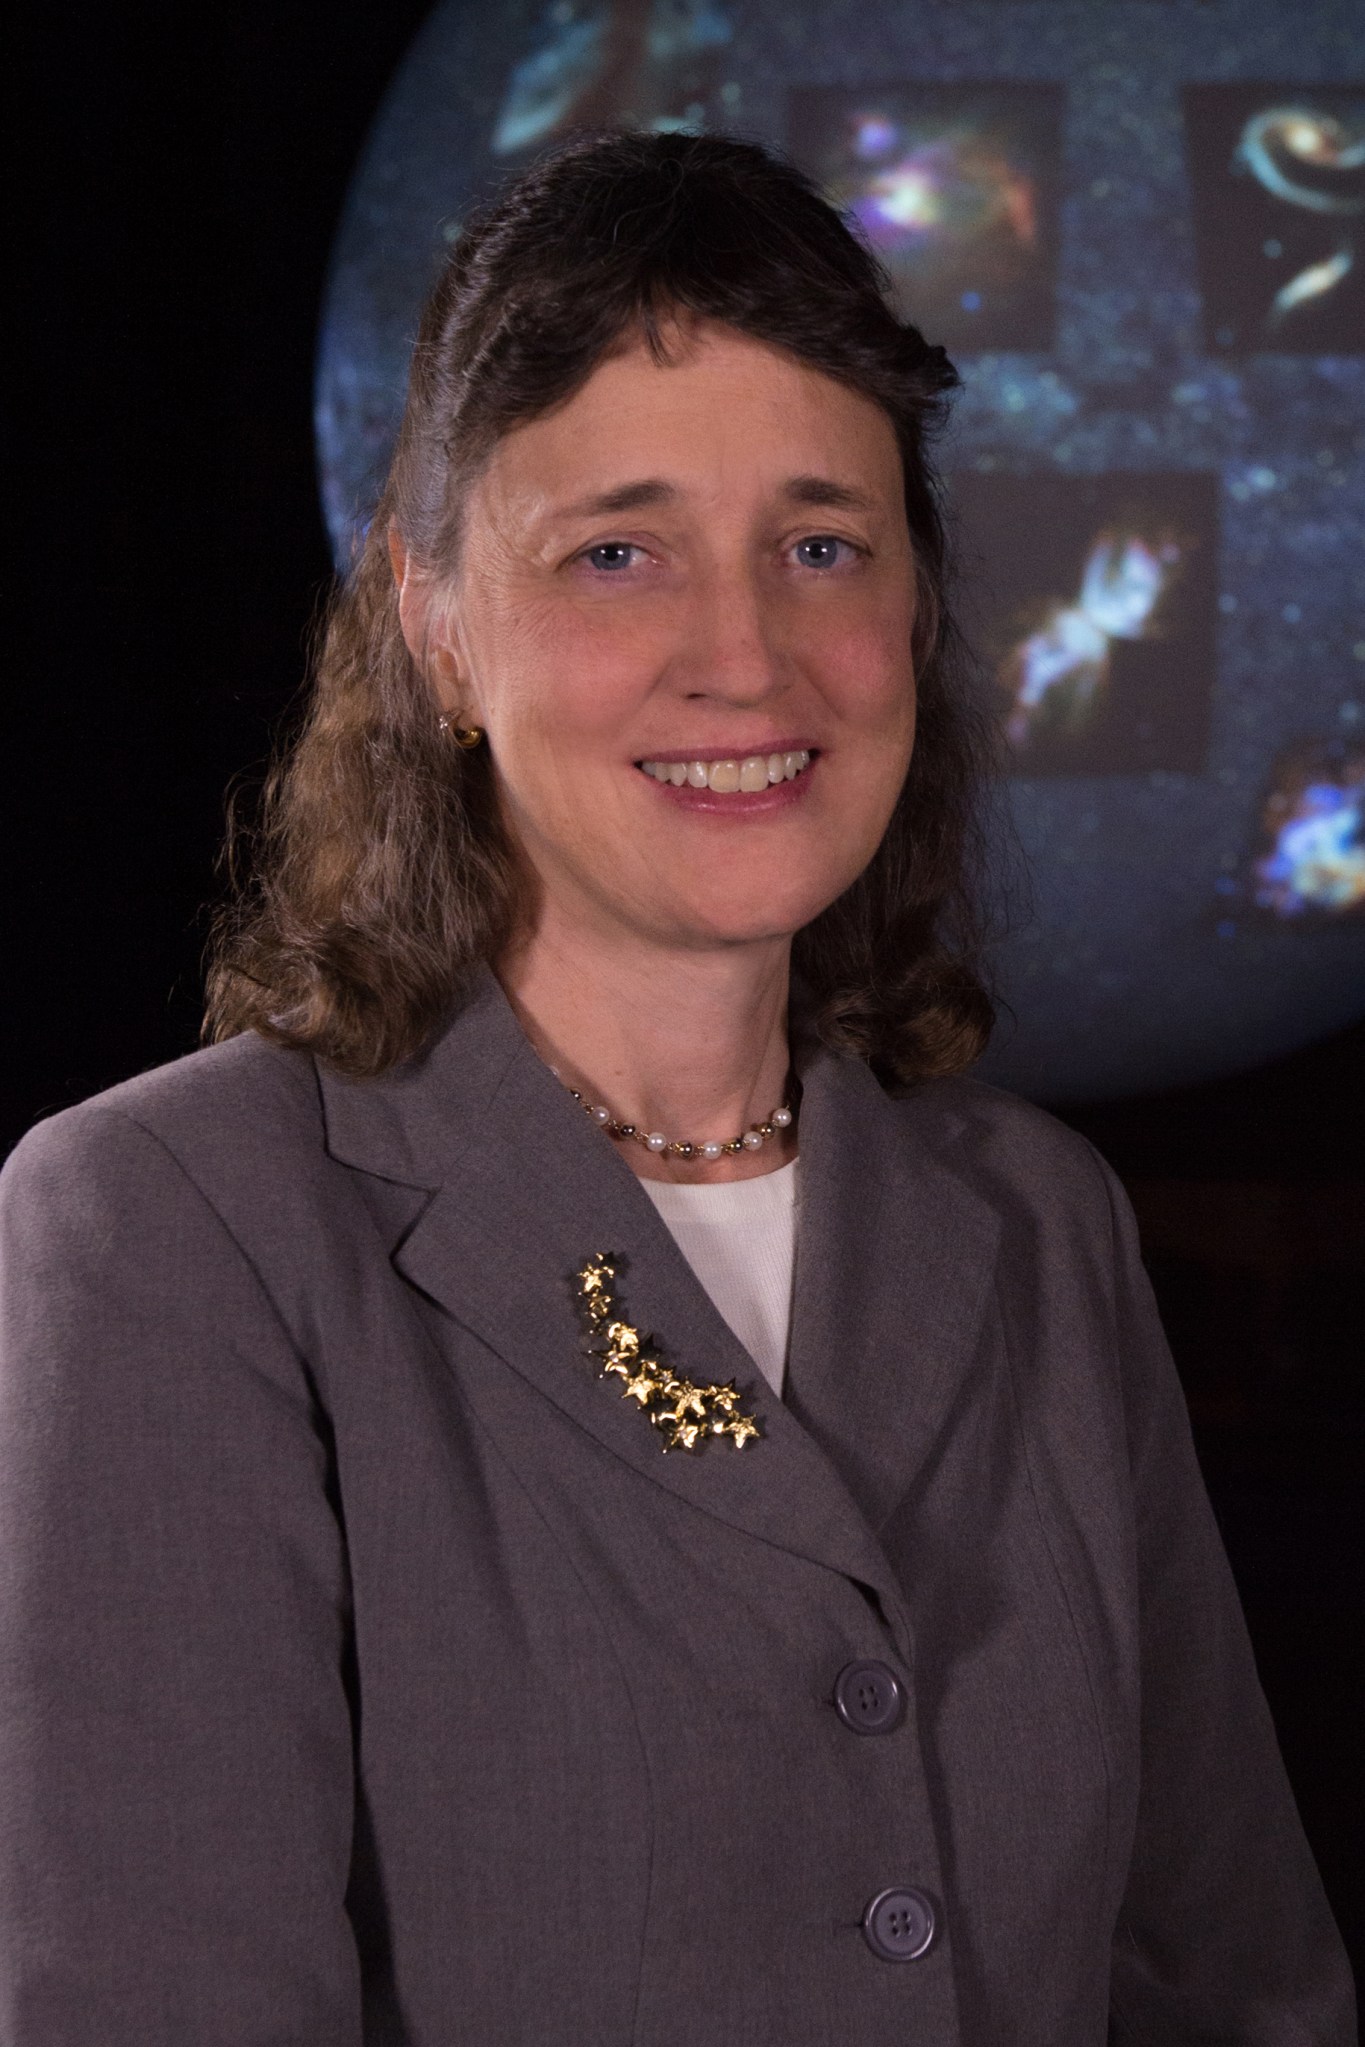 Woman with brown hair, pulled half up, wearing a grey blazer over a white shirt with a pearl necklace and gold broach with stars, smiles against a Hubble image background